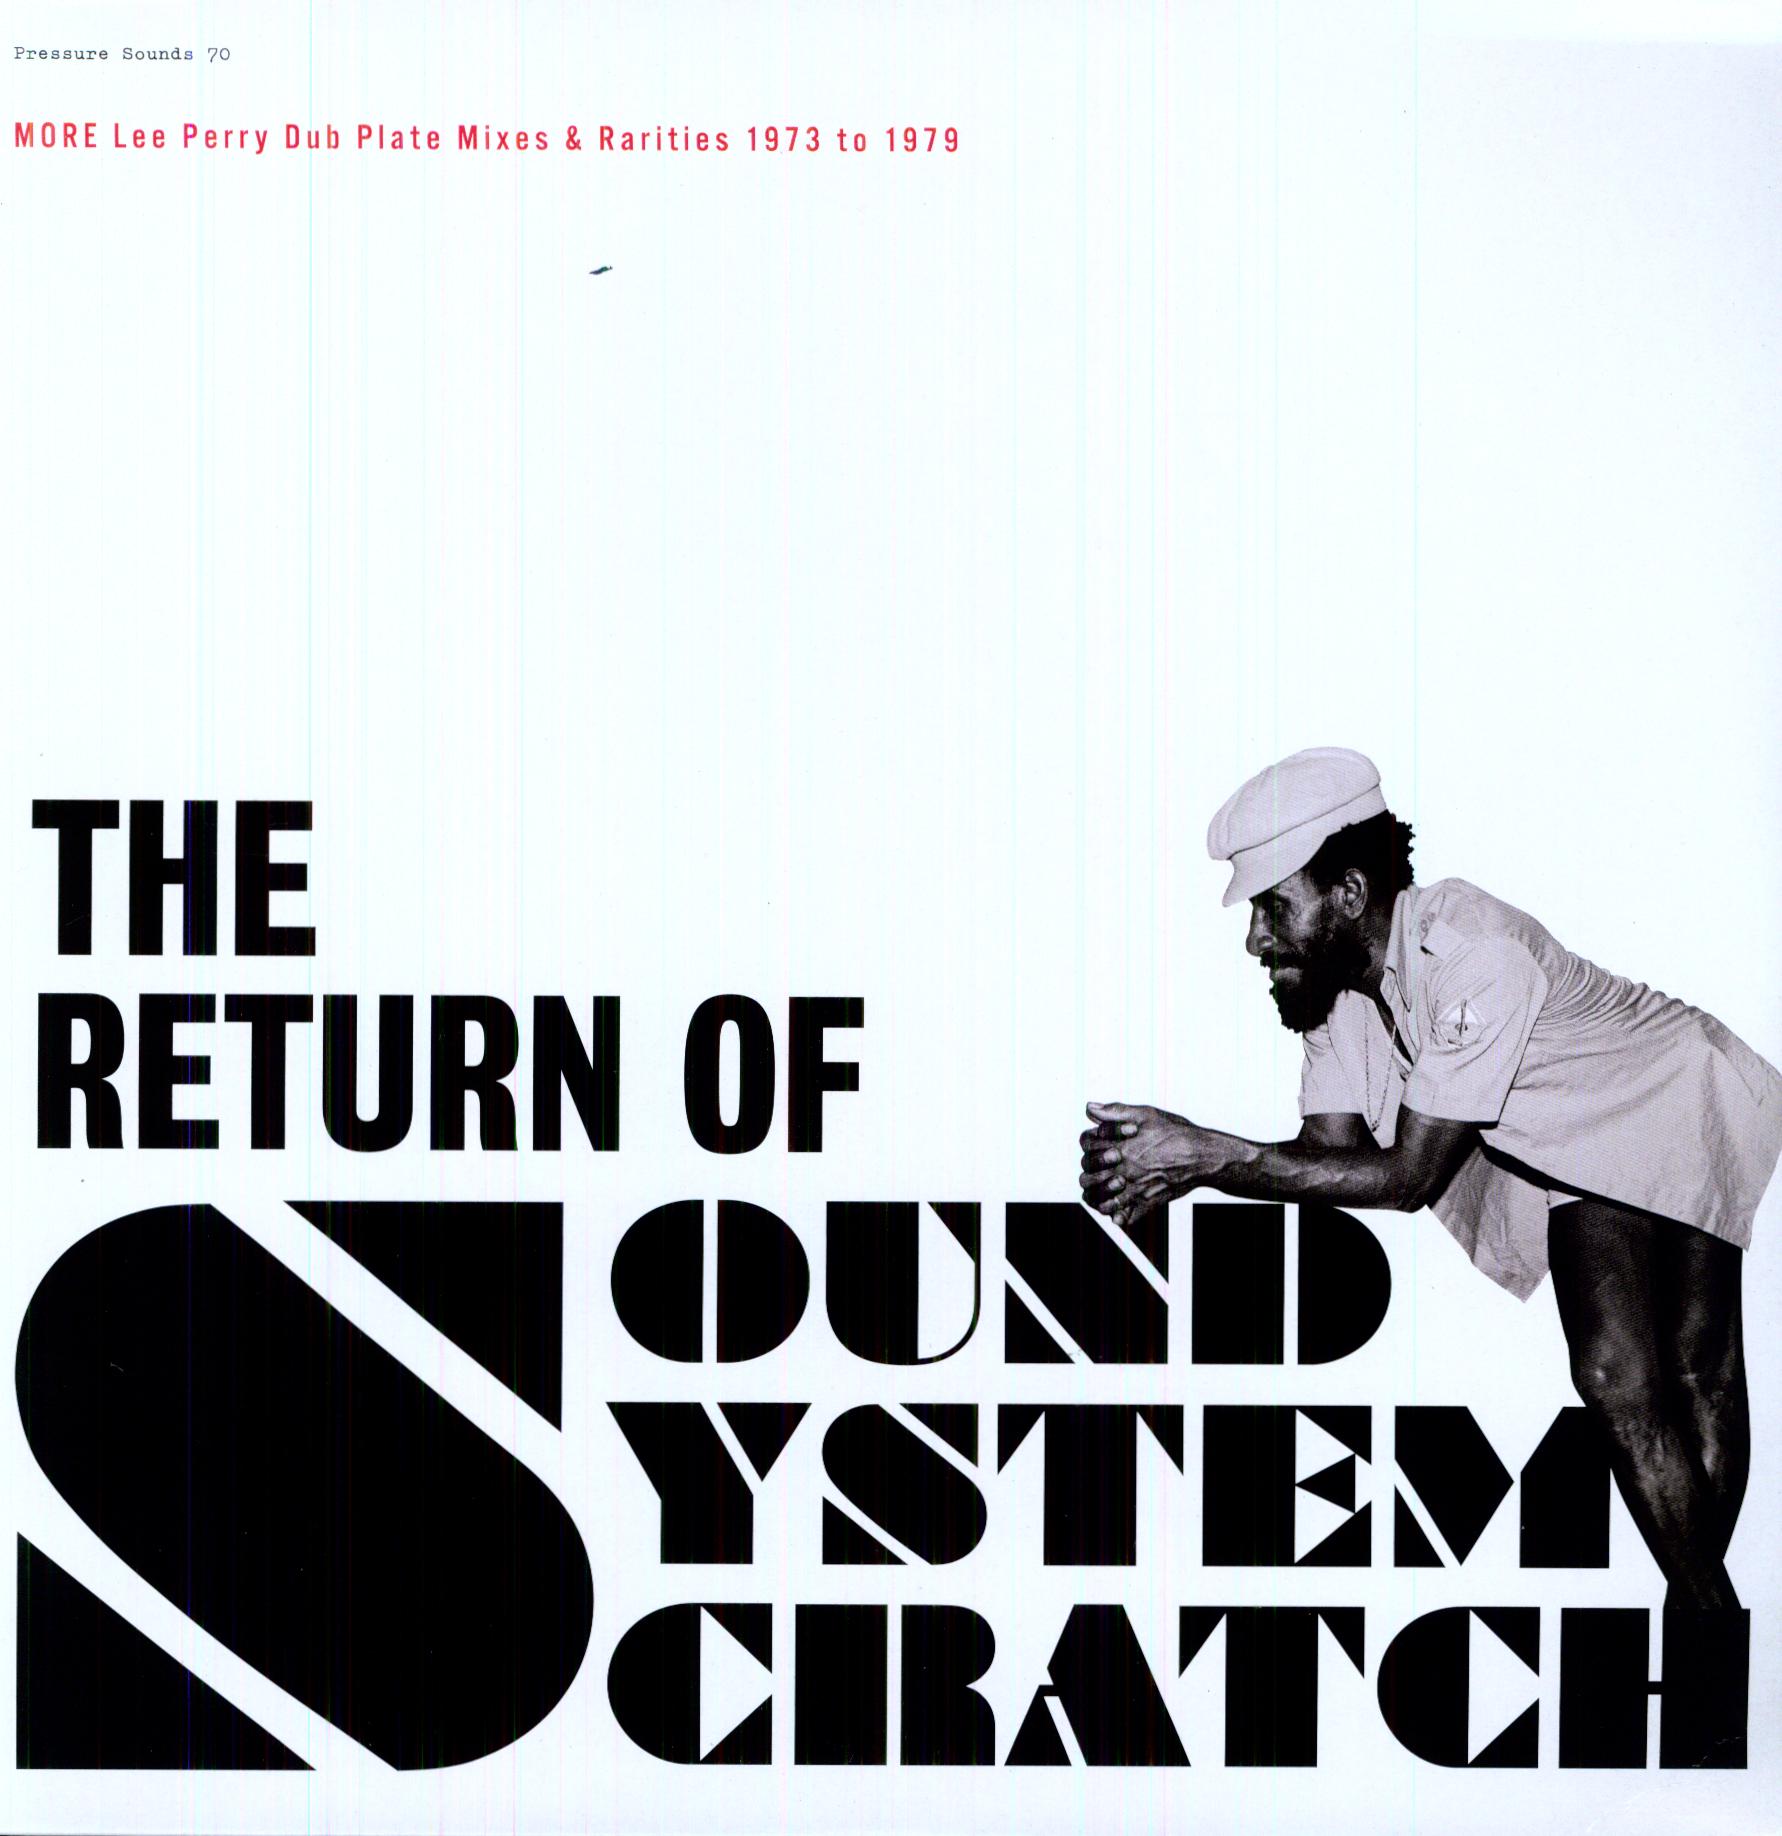 RETURN OF SOUND SYSTEM SCRATCH: MORE LEE PERRY